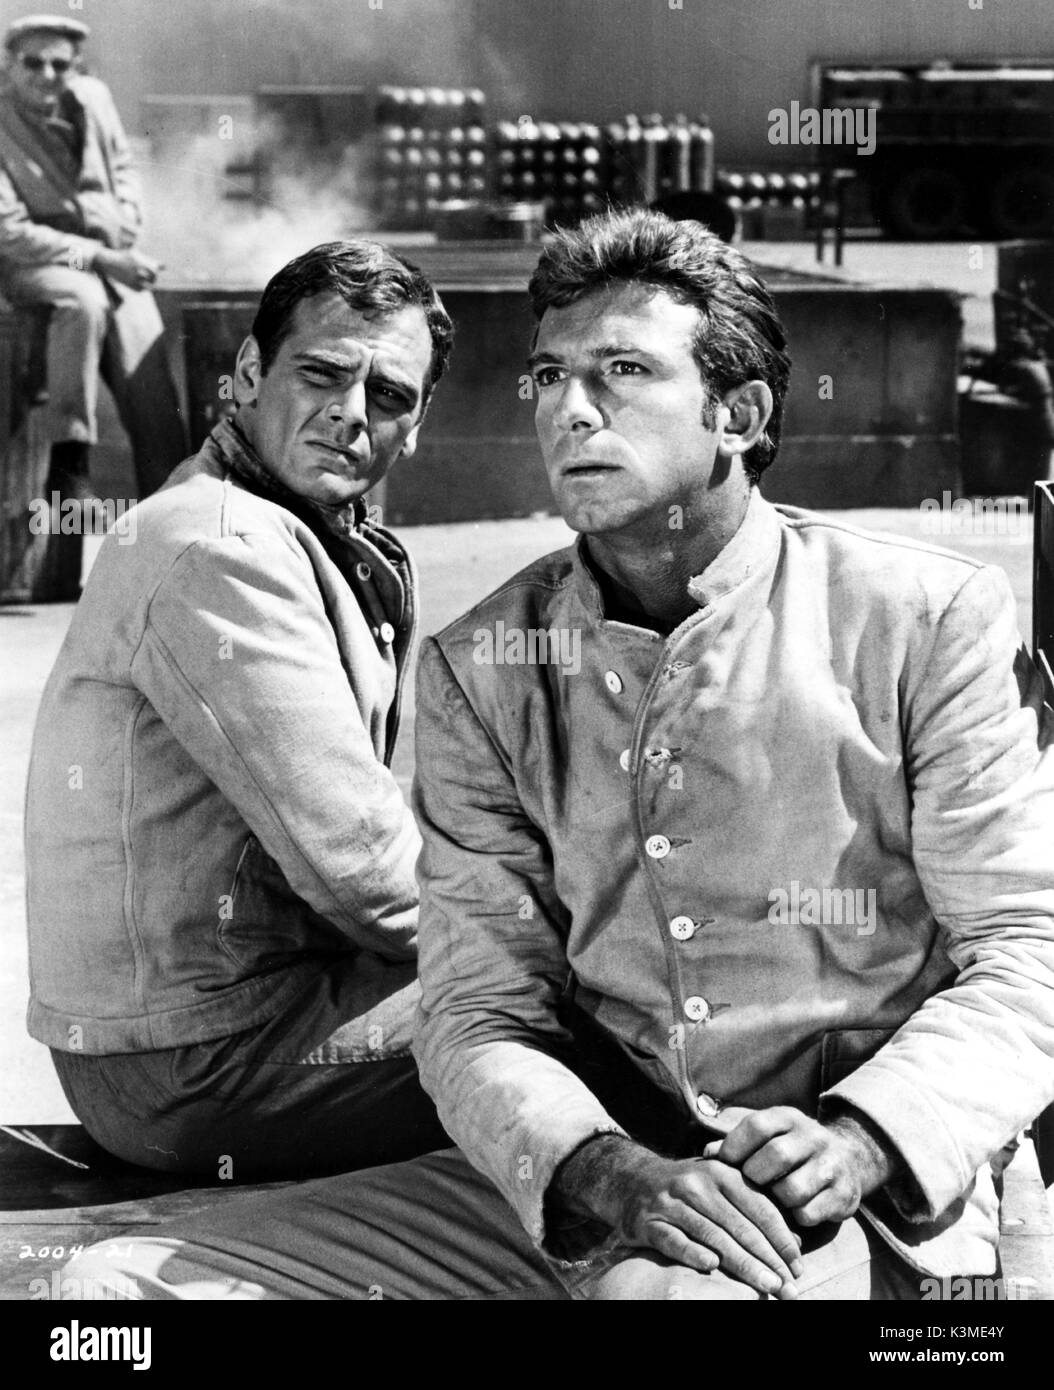 IN ENEMY COUNTRY [US 1968] GUY STOCKWELL, ANTHONY FRANCIOSA     Date: 1968 Stock Photo